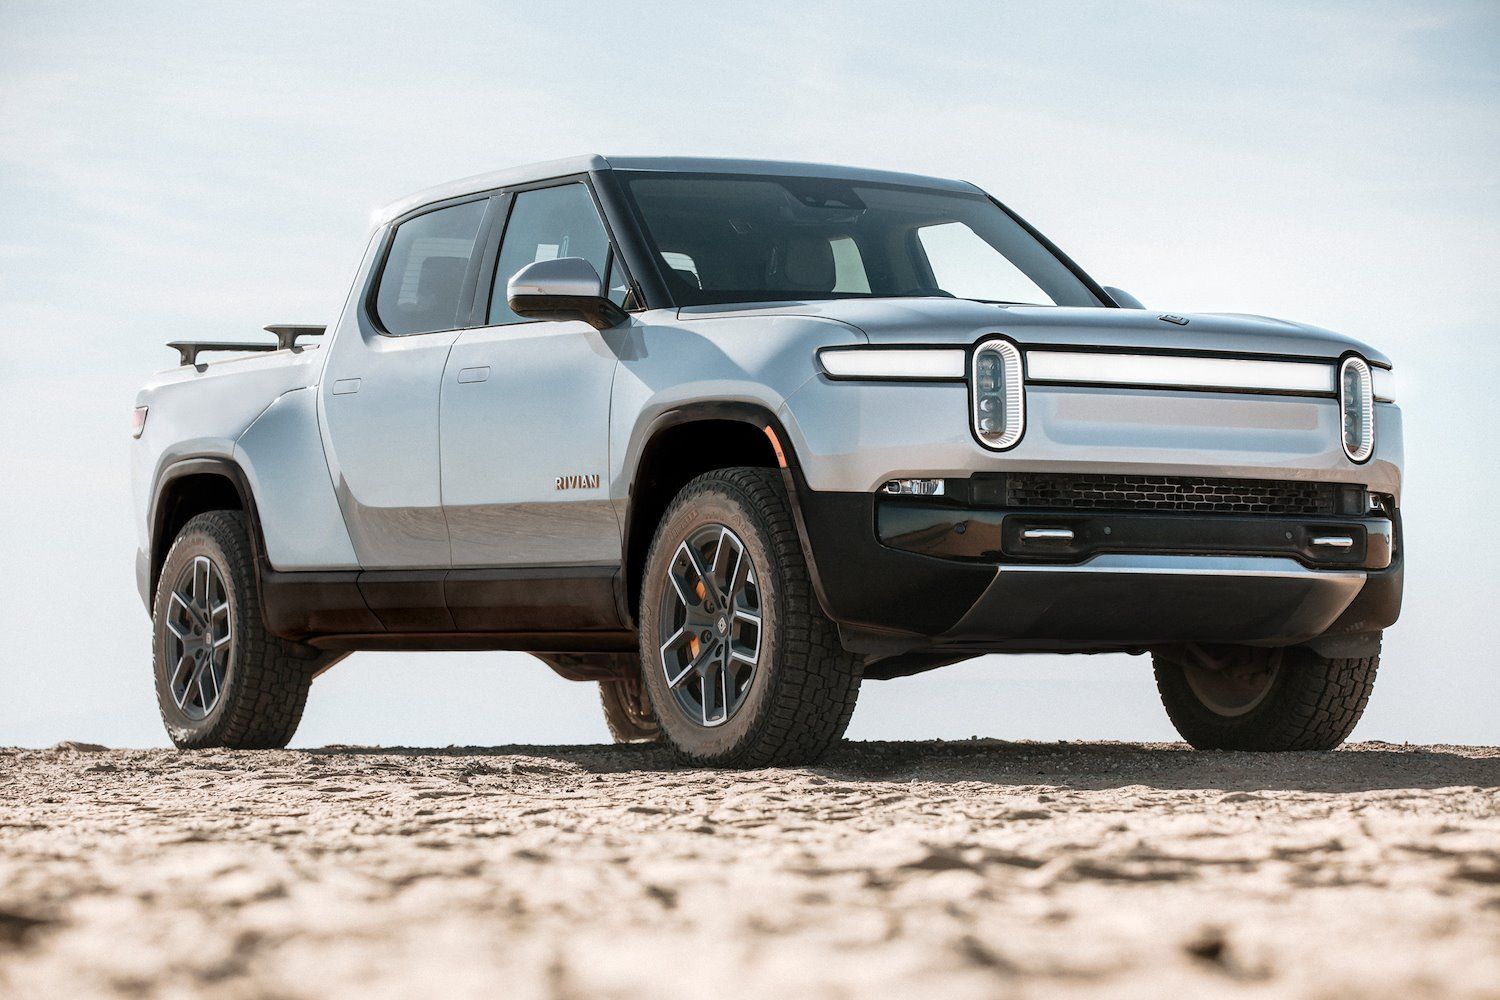 Passenger's side front angle view of silver Rivian R1T in a comparison between the Rivian R1S